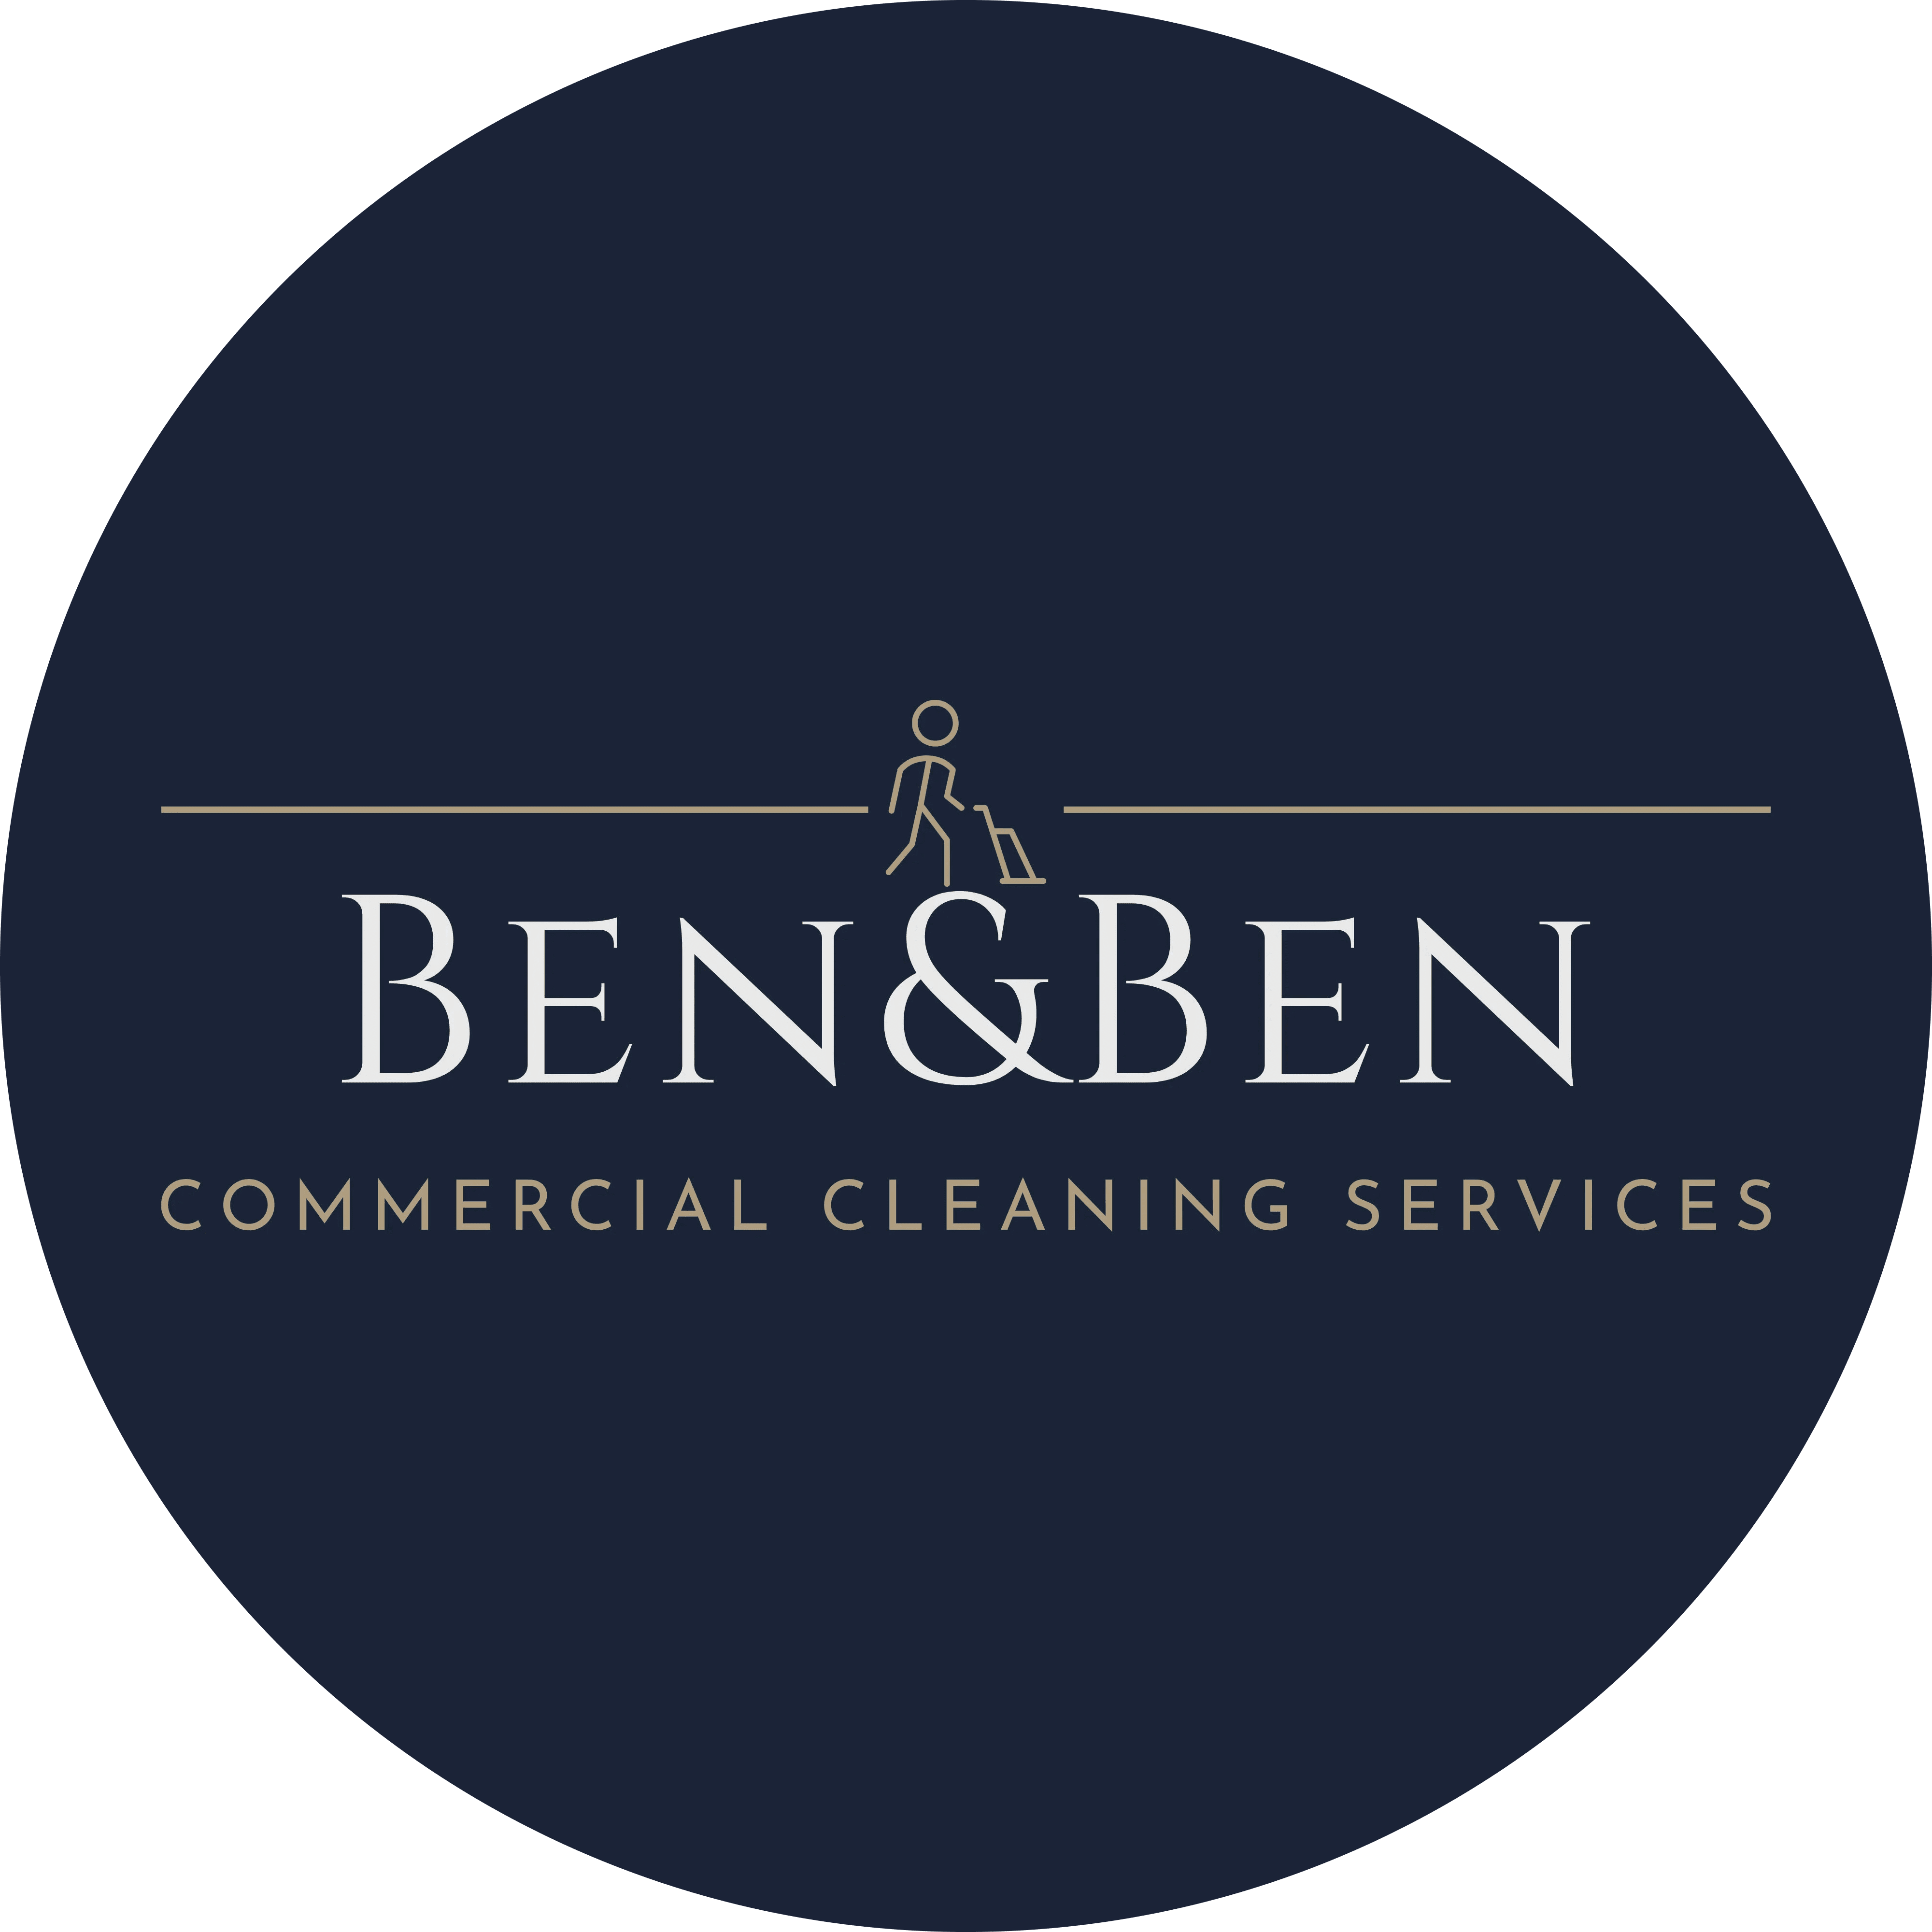 Ben&Ben Commercial Cleaning Services